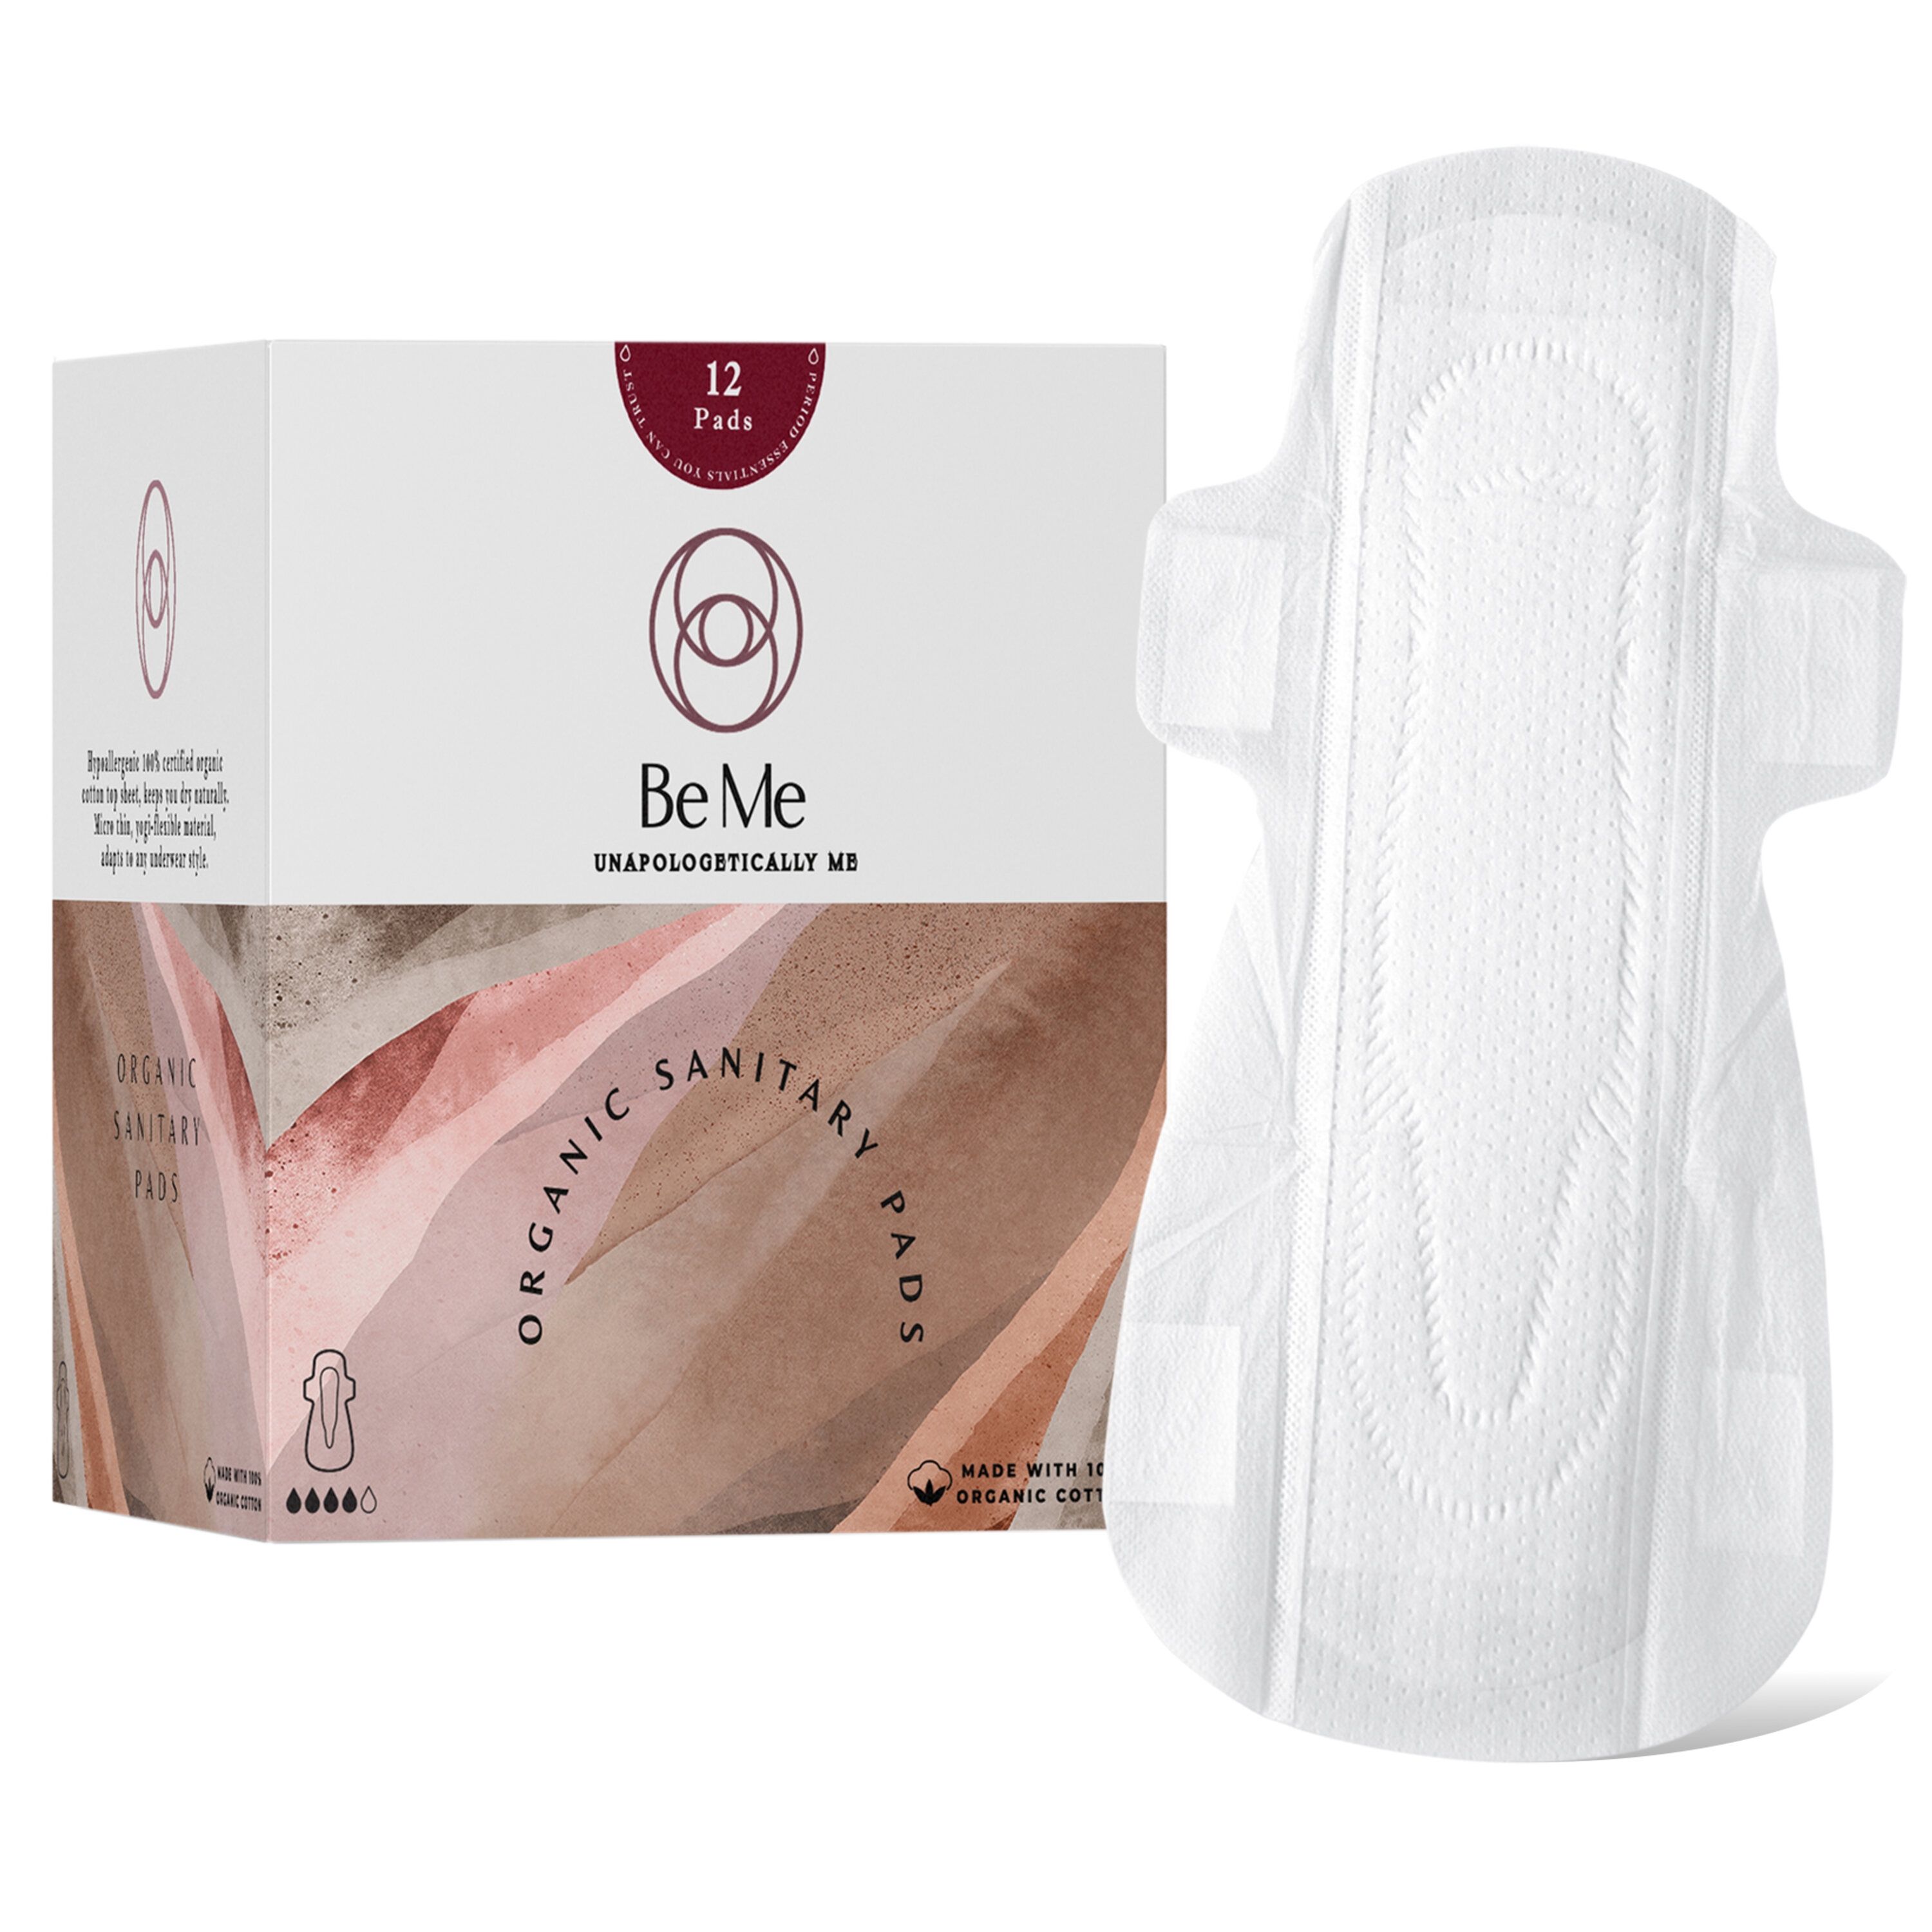 Be Me - Sanitary Pads for Women - XL (Double Wings) - Heavy Flow/Overnight Pads - Pack of 12 Pads - With Disposal Pouches, Rash Free,Biodegradable, Anti Bacterial Napkins